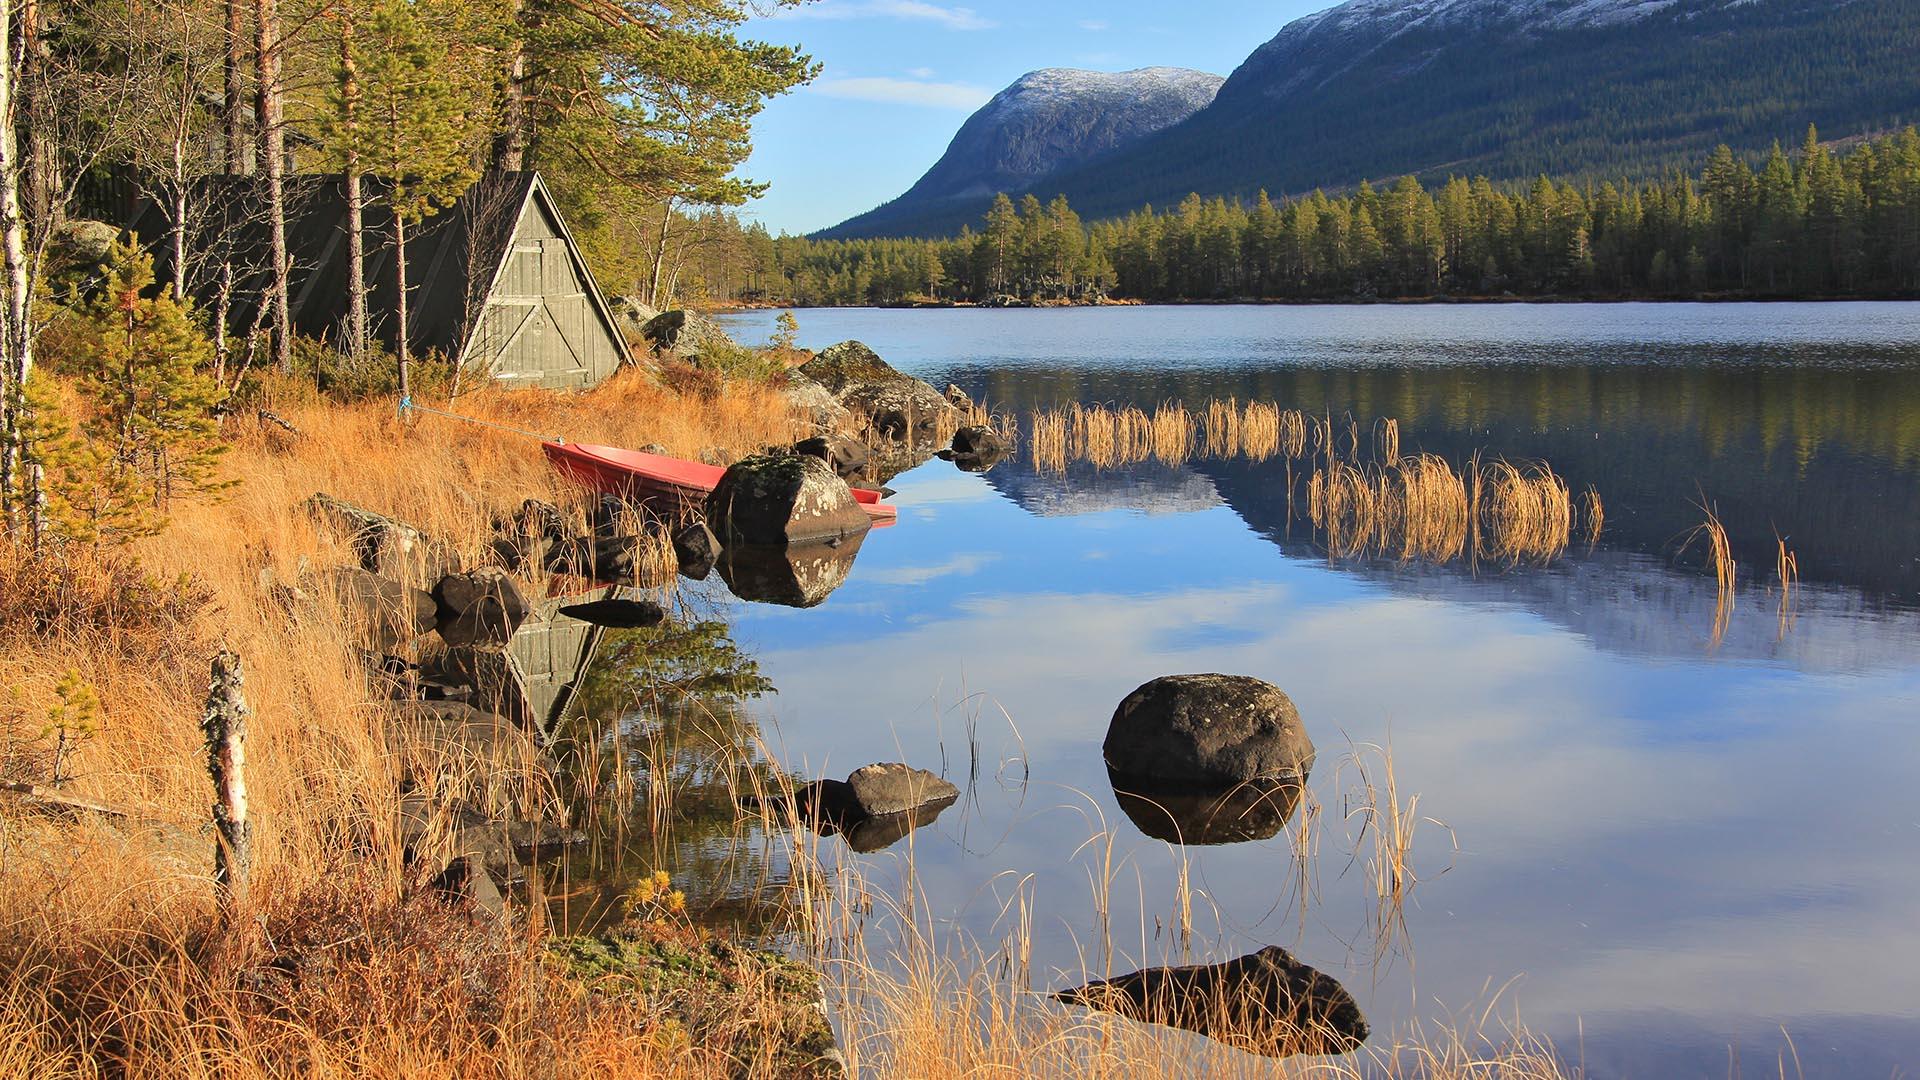 On the lakeshore with tall grass and rocks sits a boat house and a canoe. Mountains and forested hillsides in the background. The pale blue sky is mirrored in the water.